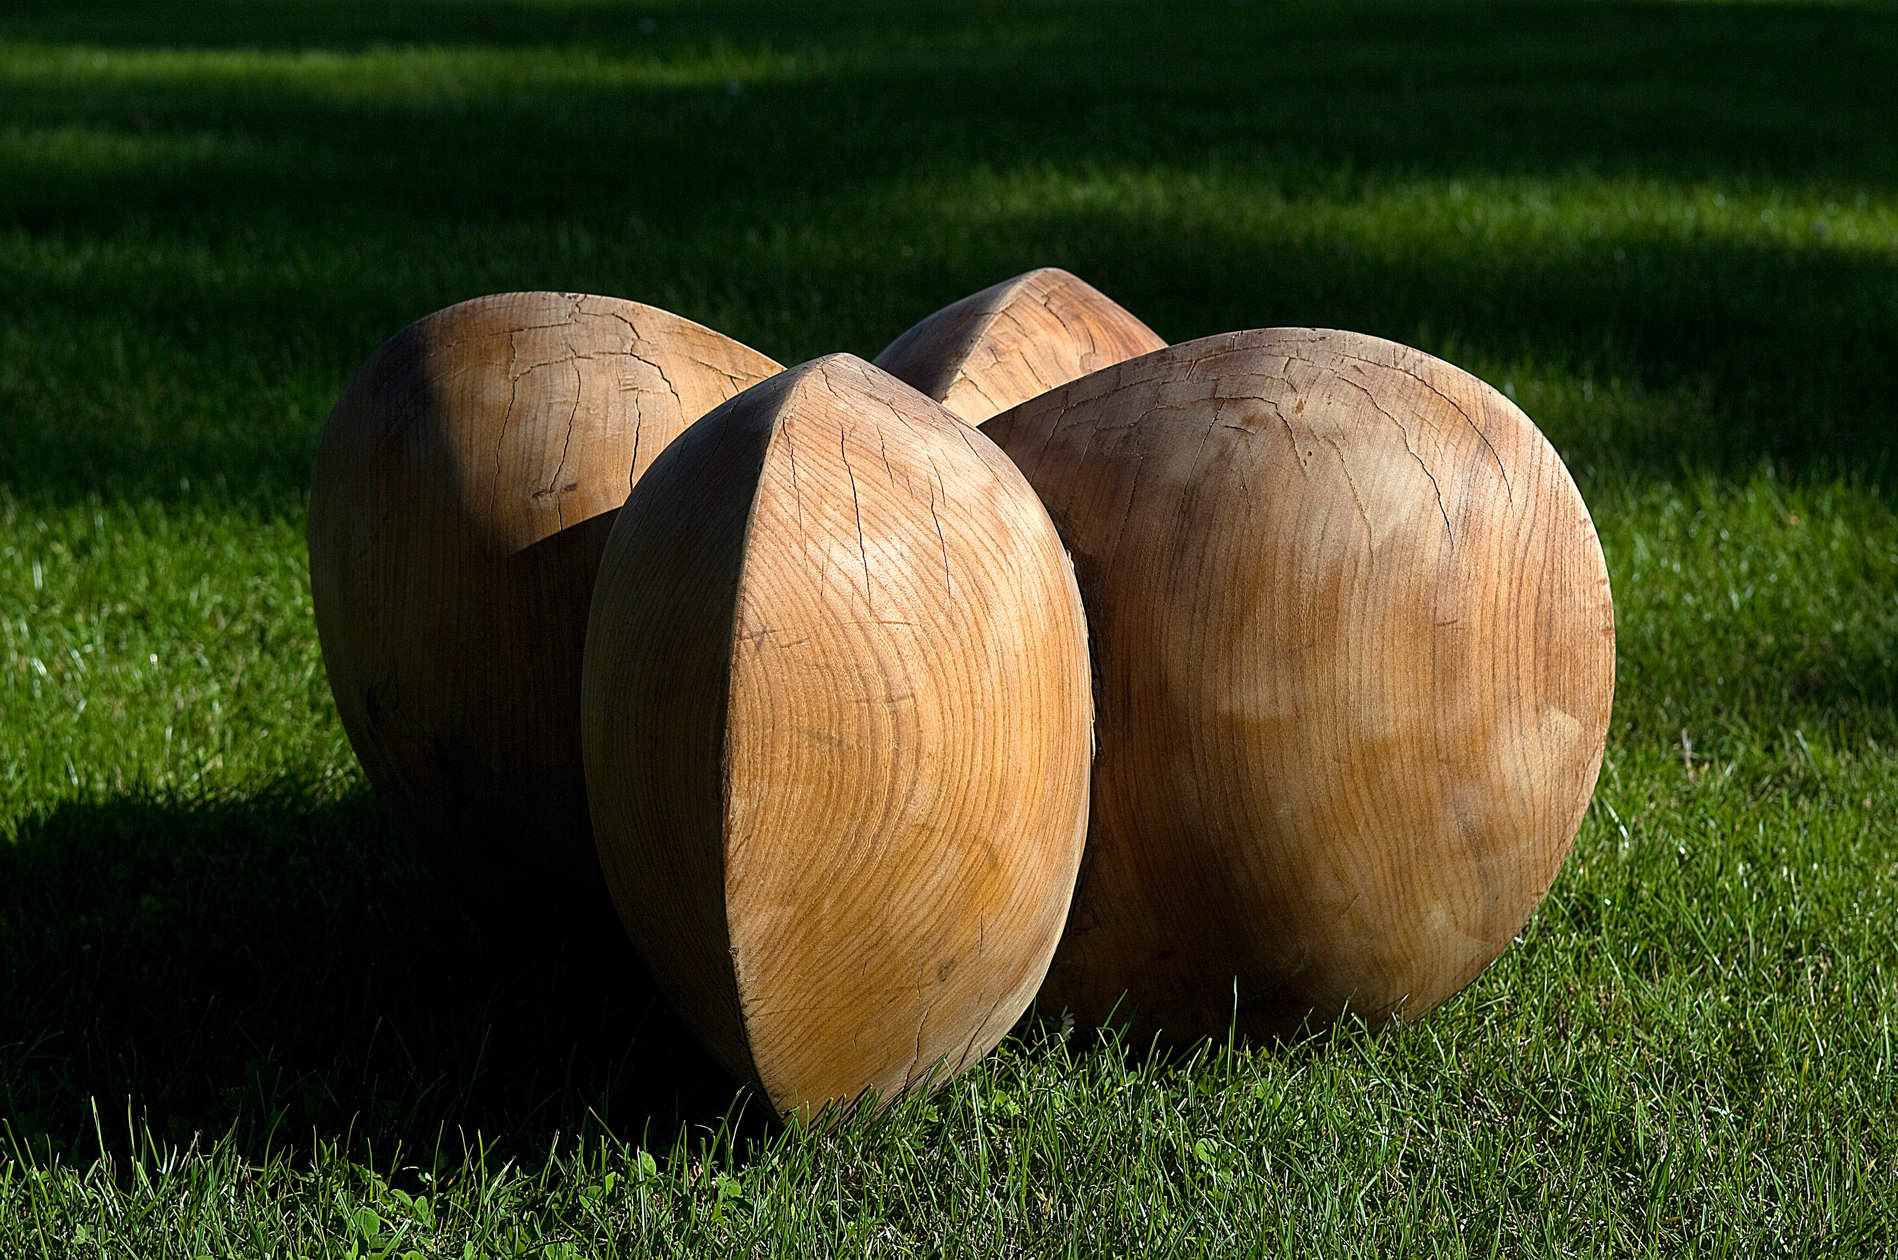    Euonymus seed    Elm wood, 60 cm X 60 cm, Sold    